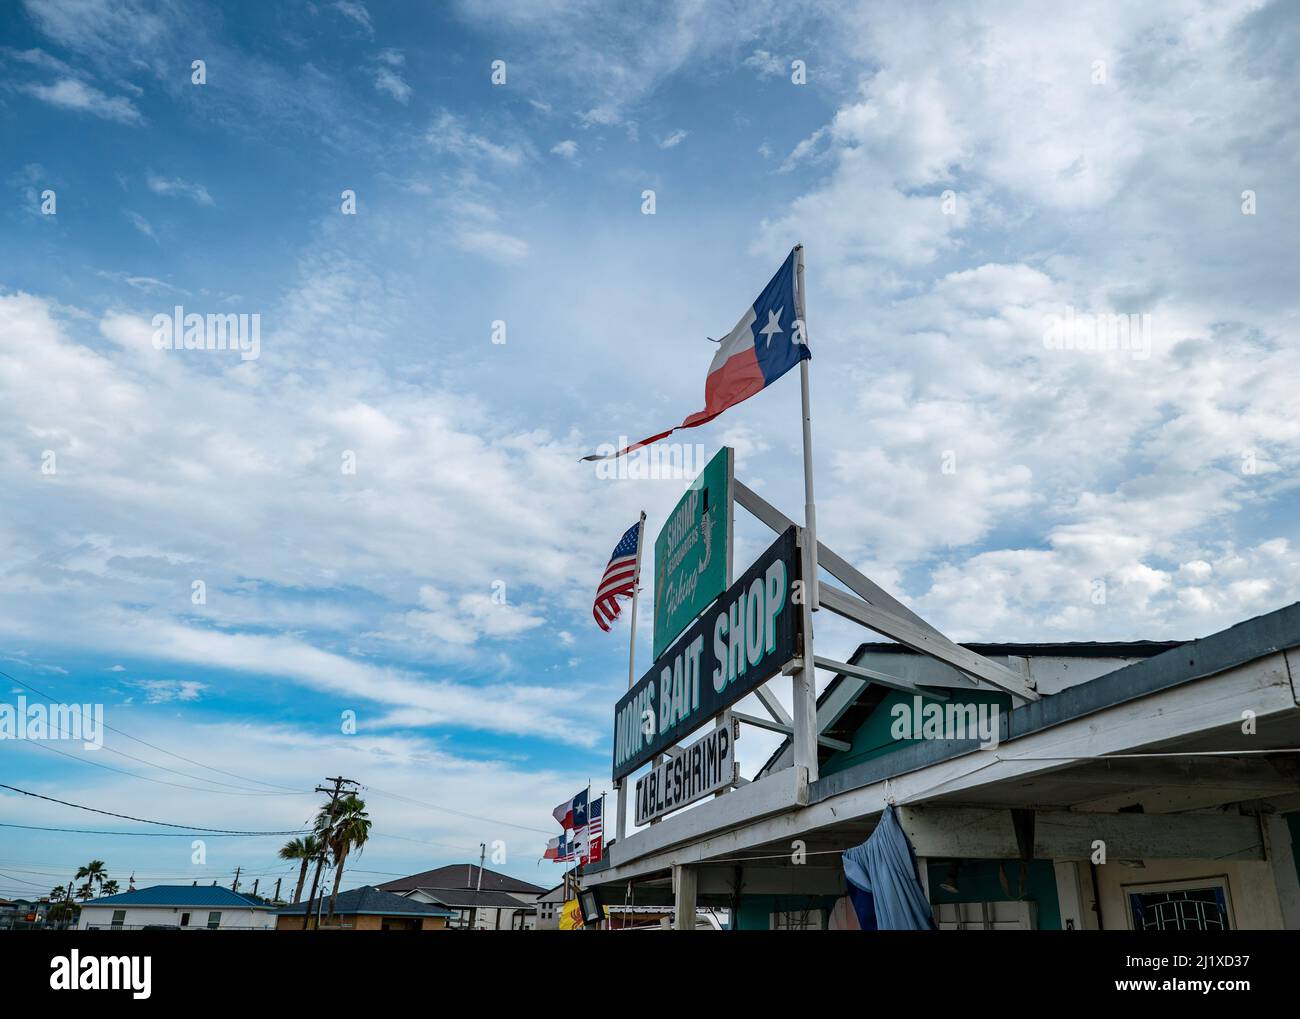 ROCKPORT, TX - 3 FEB 2020: MOMS BAIT SHOP store front sign and flags with clouds and blue sky in background. A popular place for fresh shrimp. Stock Photo